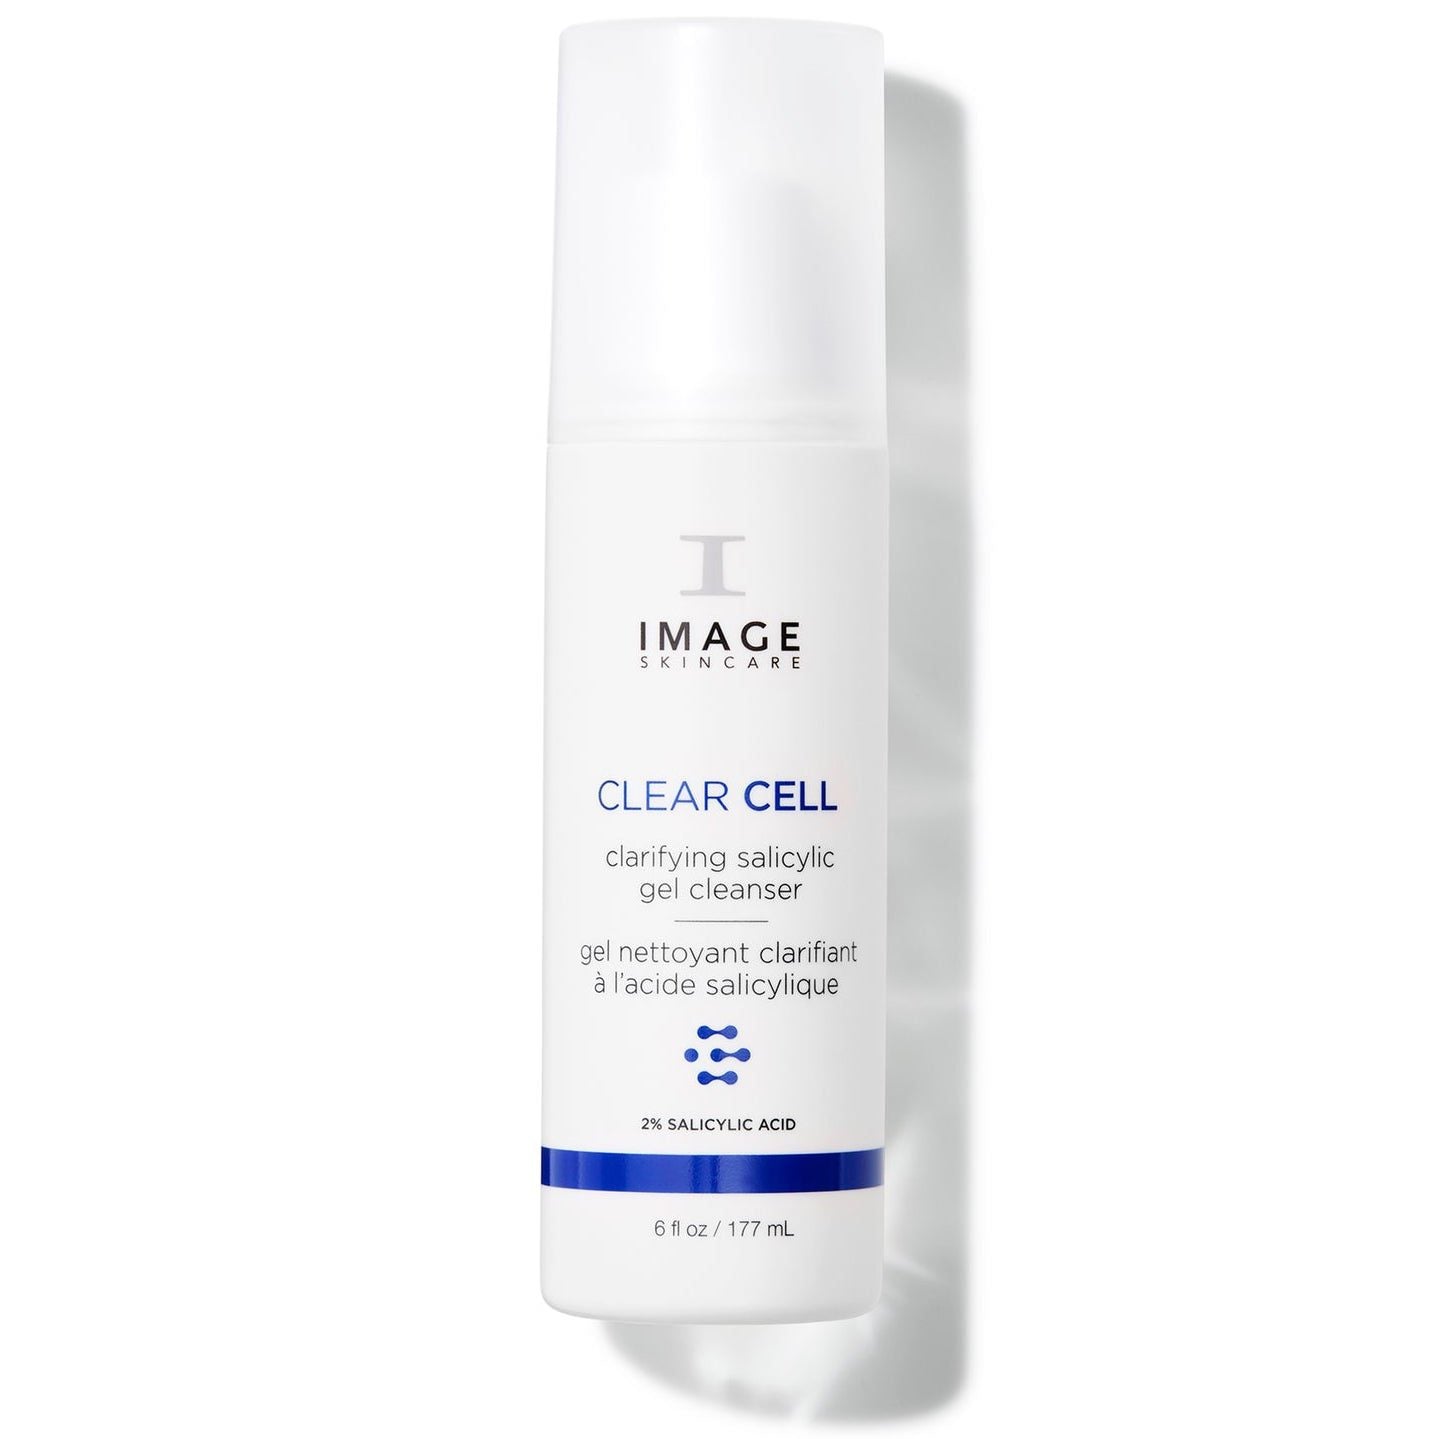 Image Skincare CLEAR CELL Clarifying Gel Cleanser SkinShop.ie